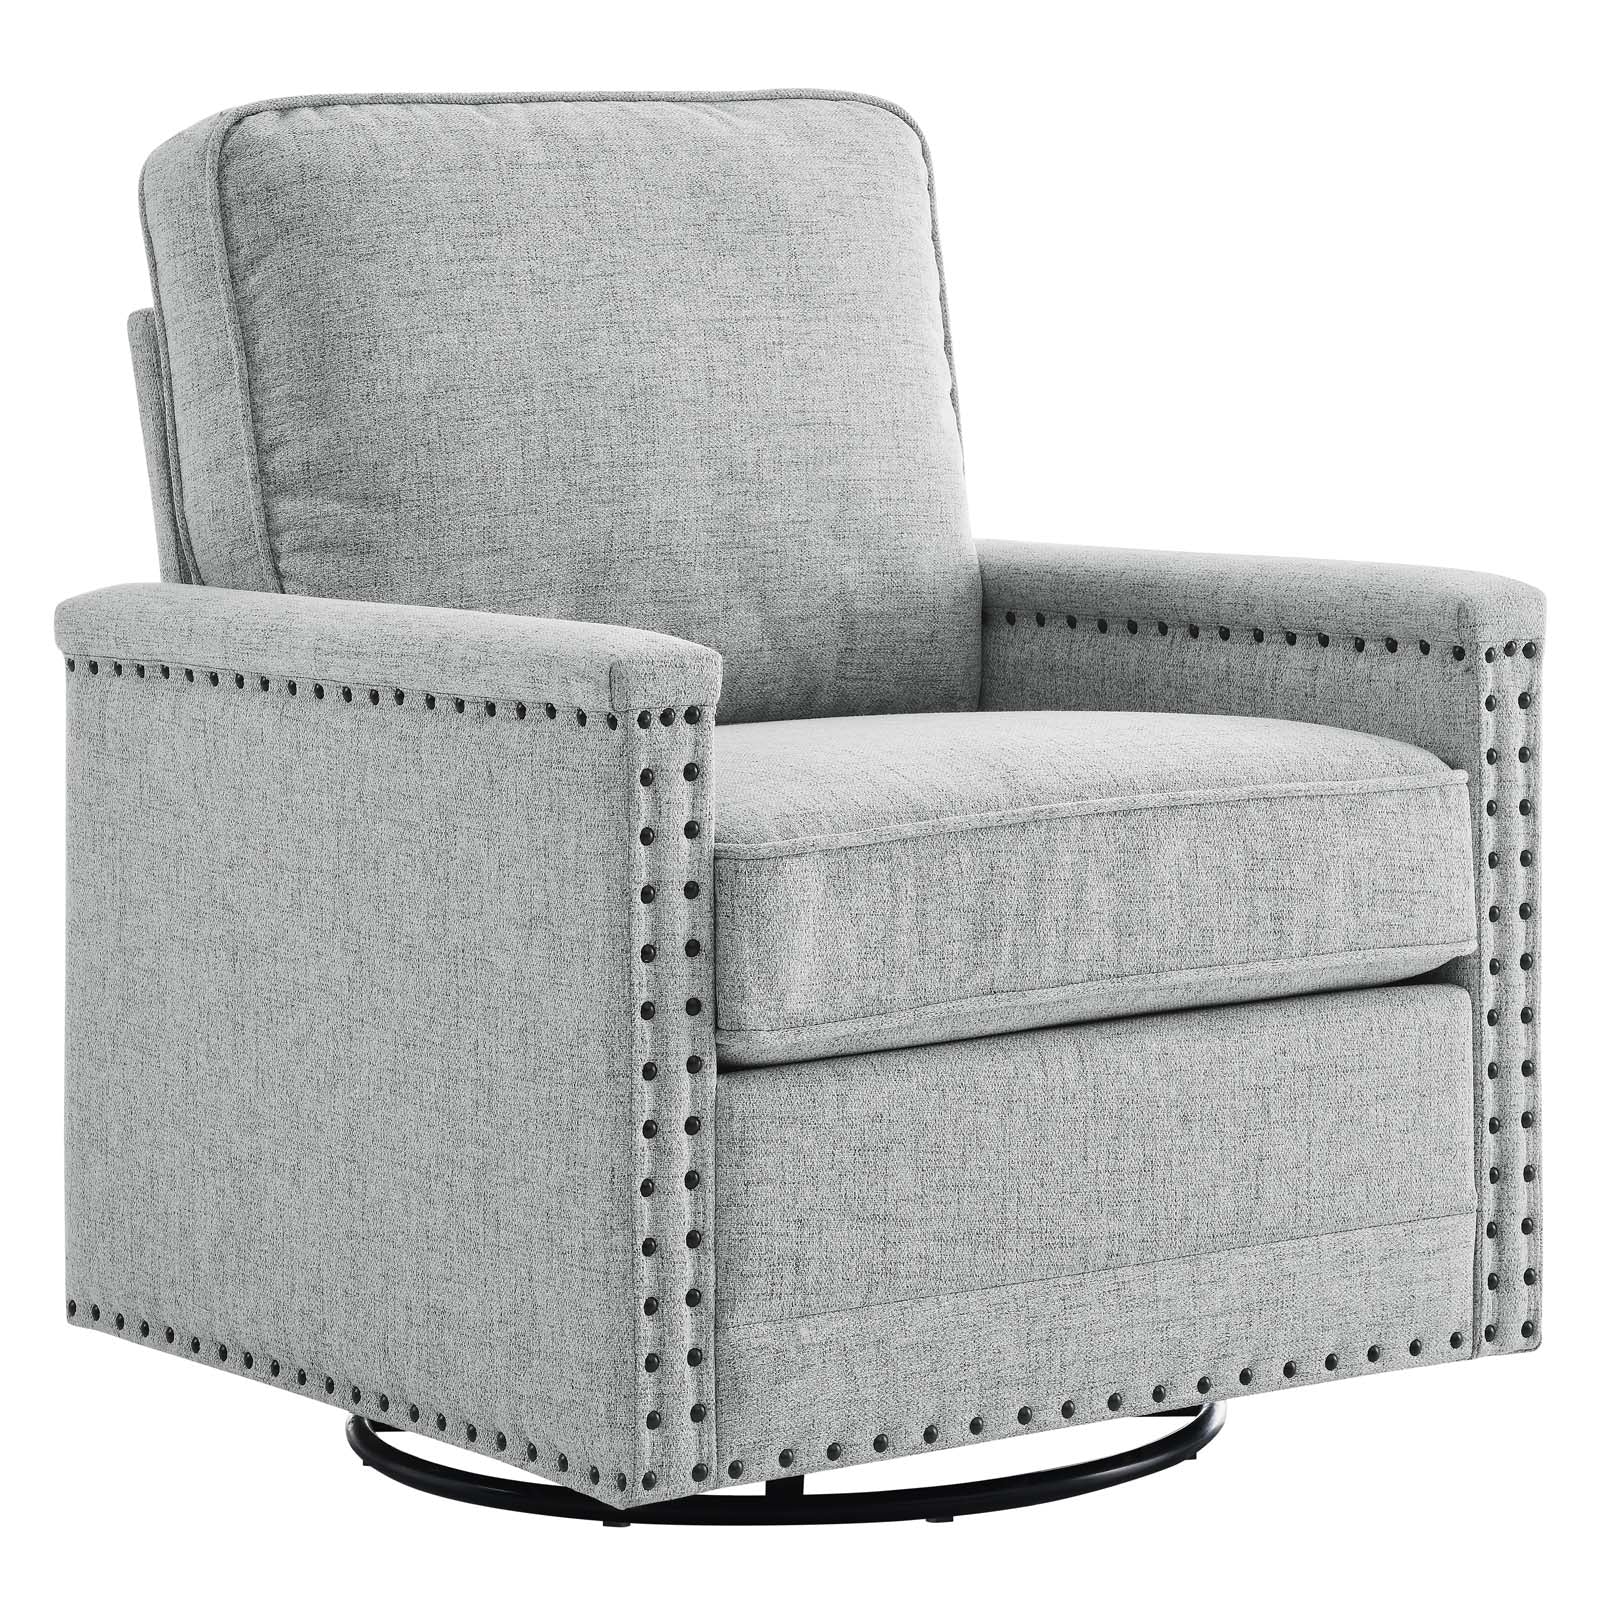 Modway Accent Chairs - Ashton Upholstered Fabric Swivel Chair Light Gray